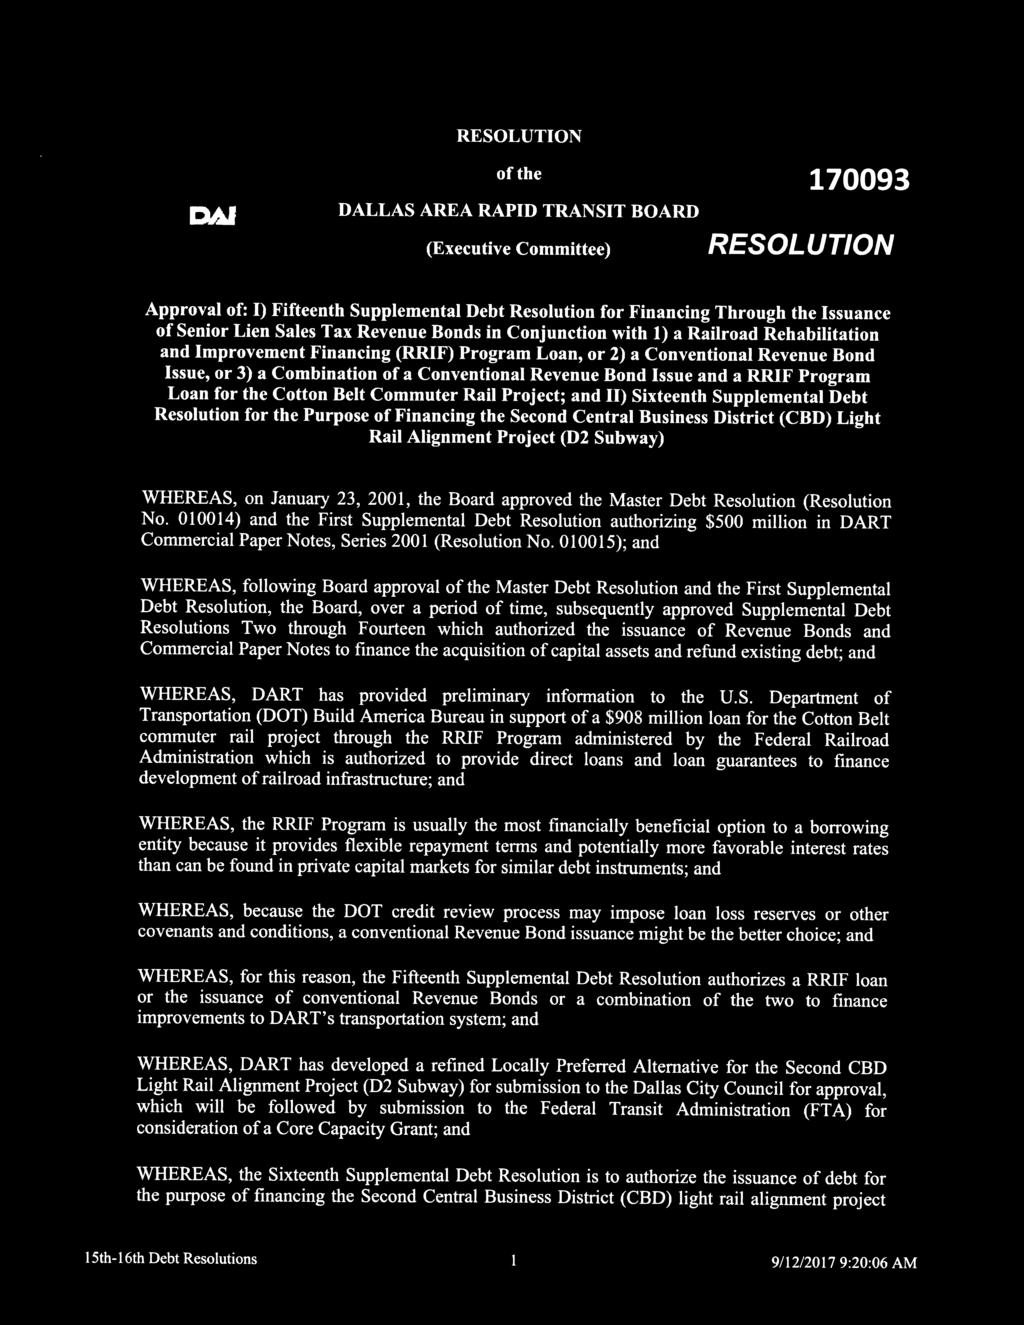 Bond Issue and a RRIF Program Loan for the Cotton Belt Commuter Rail Project; and II) Sixteenth Supplemental Debt Resolution for the Purpose of Financing the Second Central Business District (CBD)